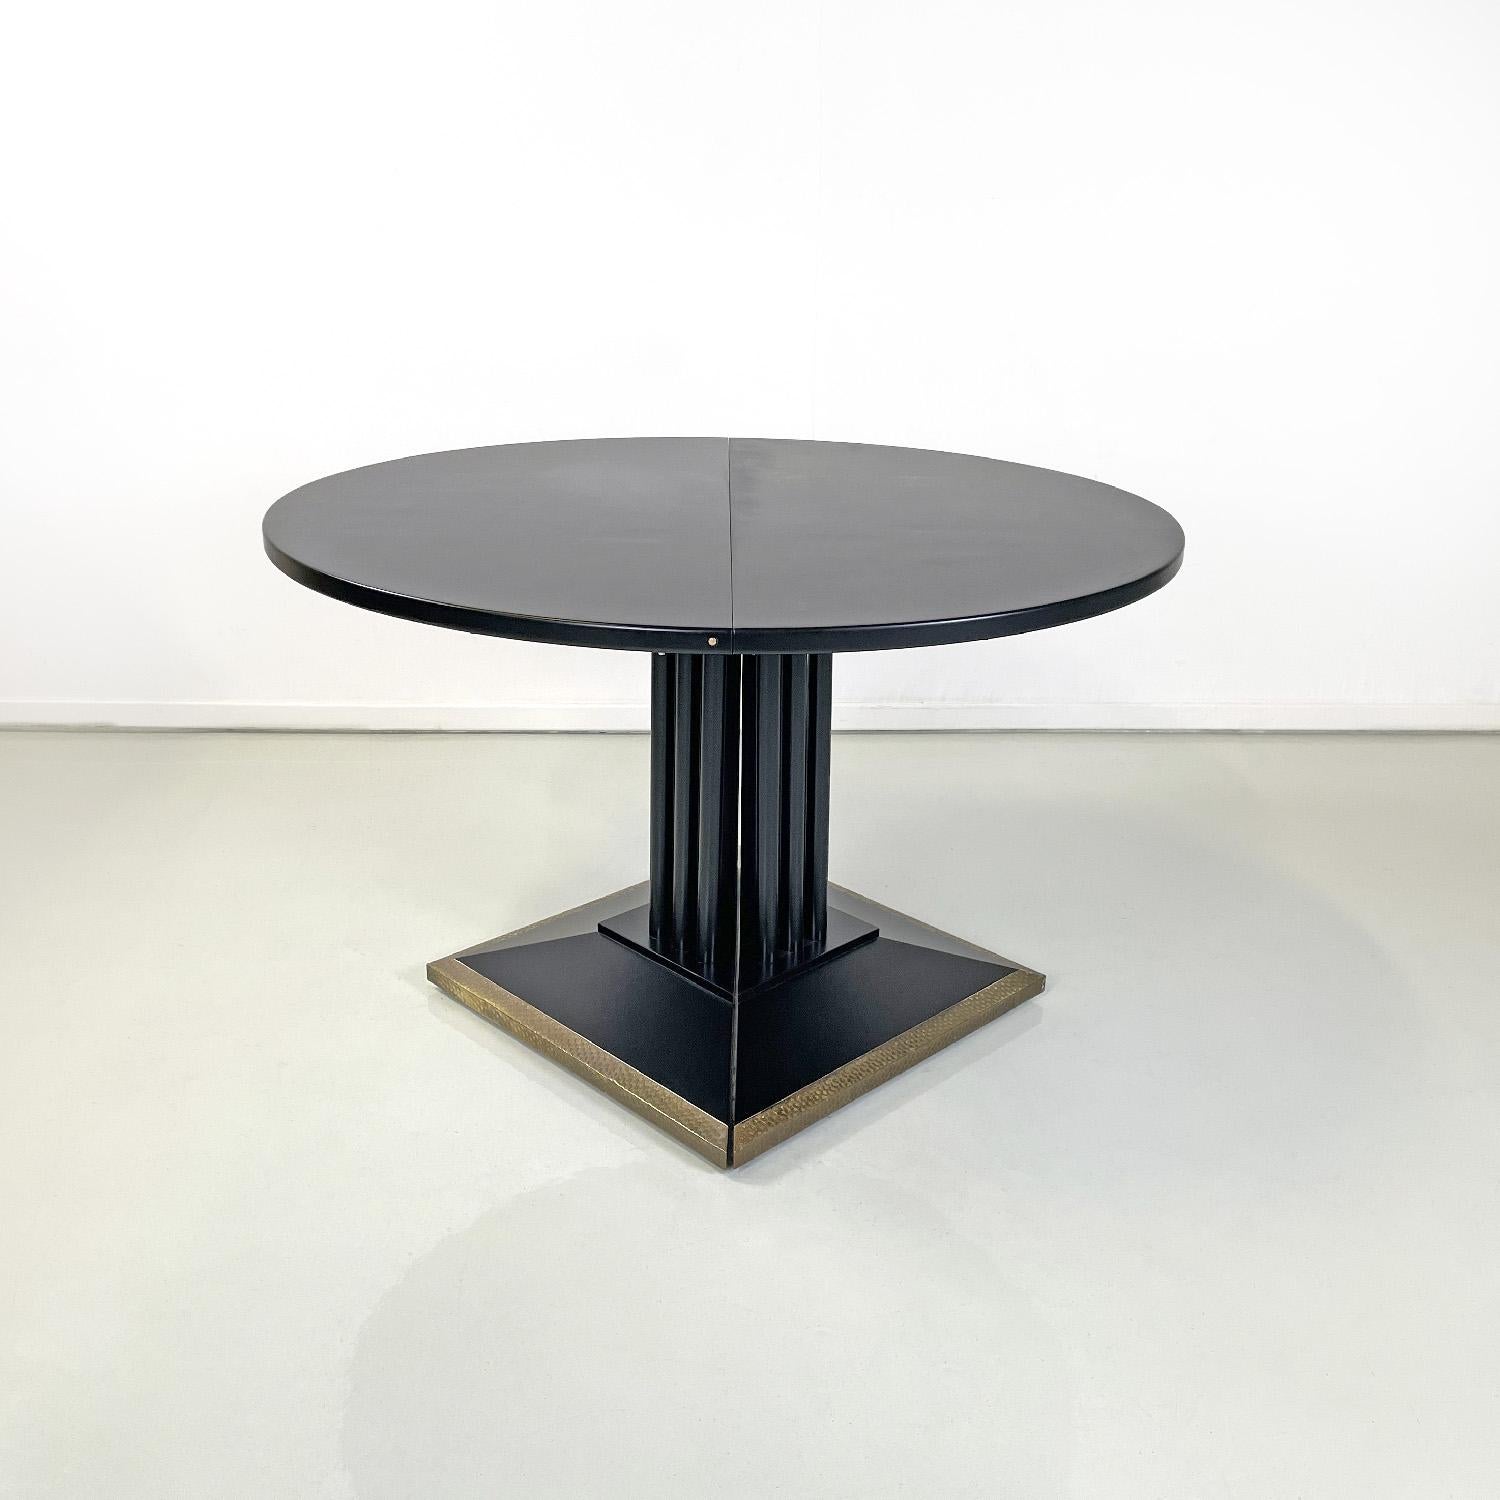 Italian modern extendable black and gold dining table by Thonet, 1990s
Round extendable dining table in black lacquered wood with matt finish. This table can be opened and up to two extensions can be added, so it can be used with three different